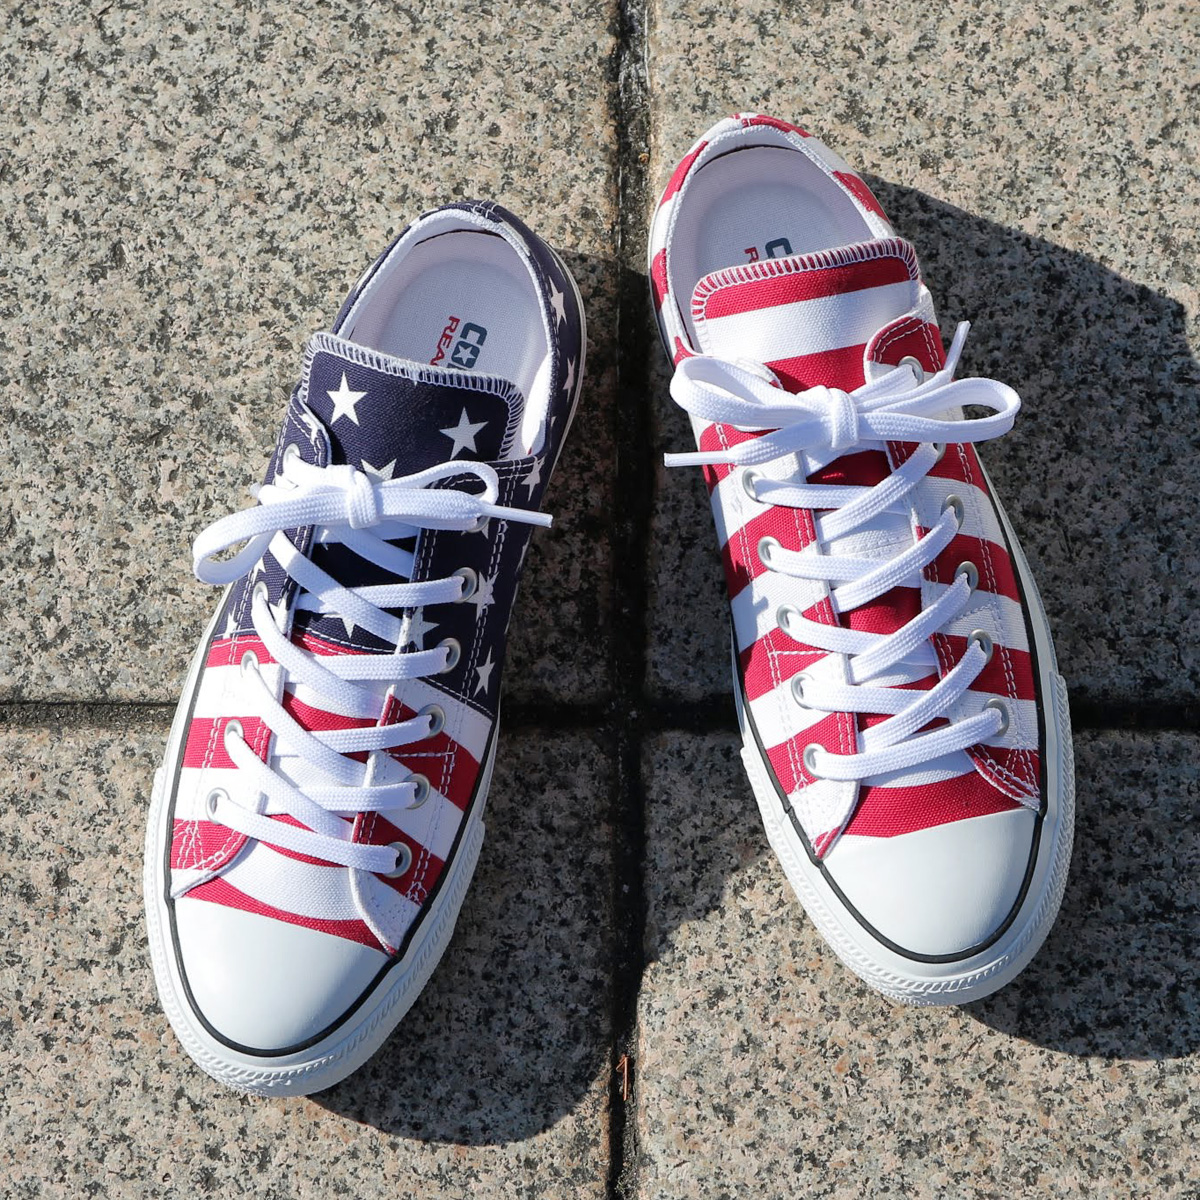 converse all star shoes usa